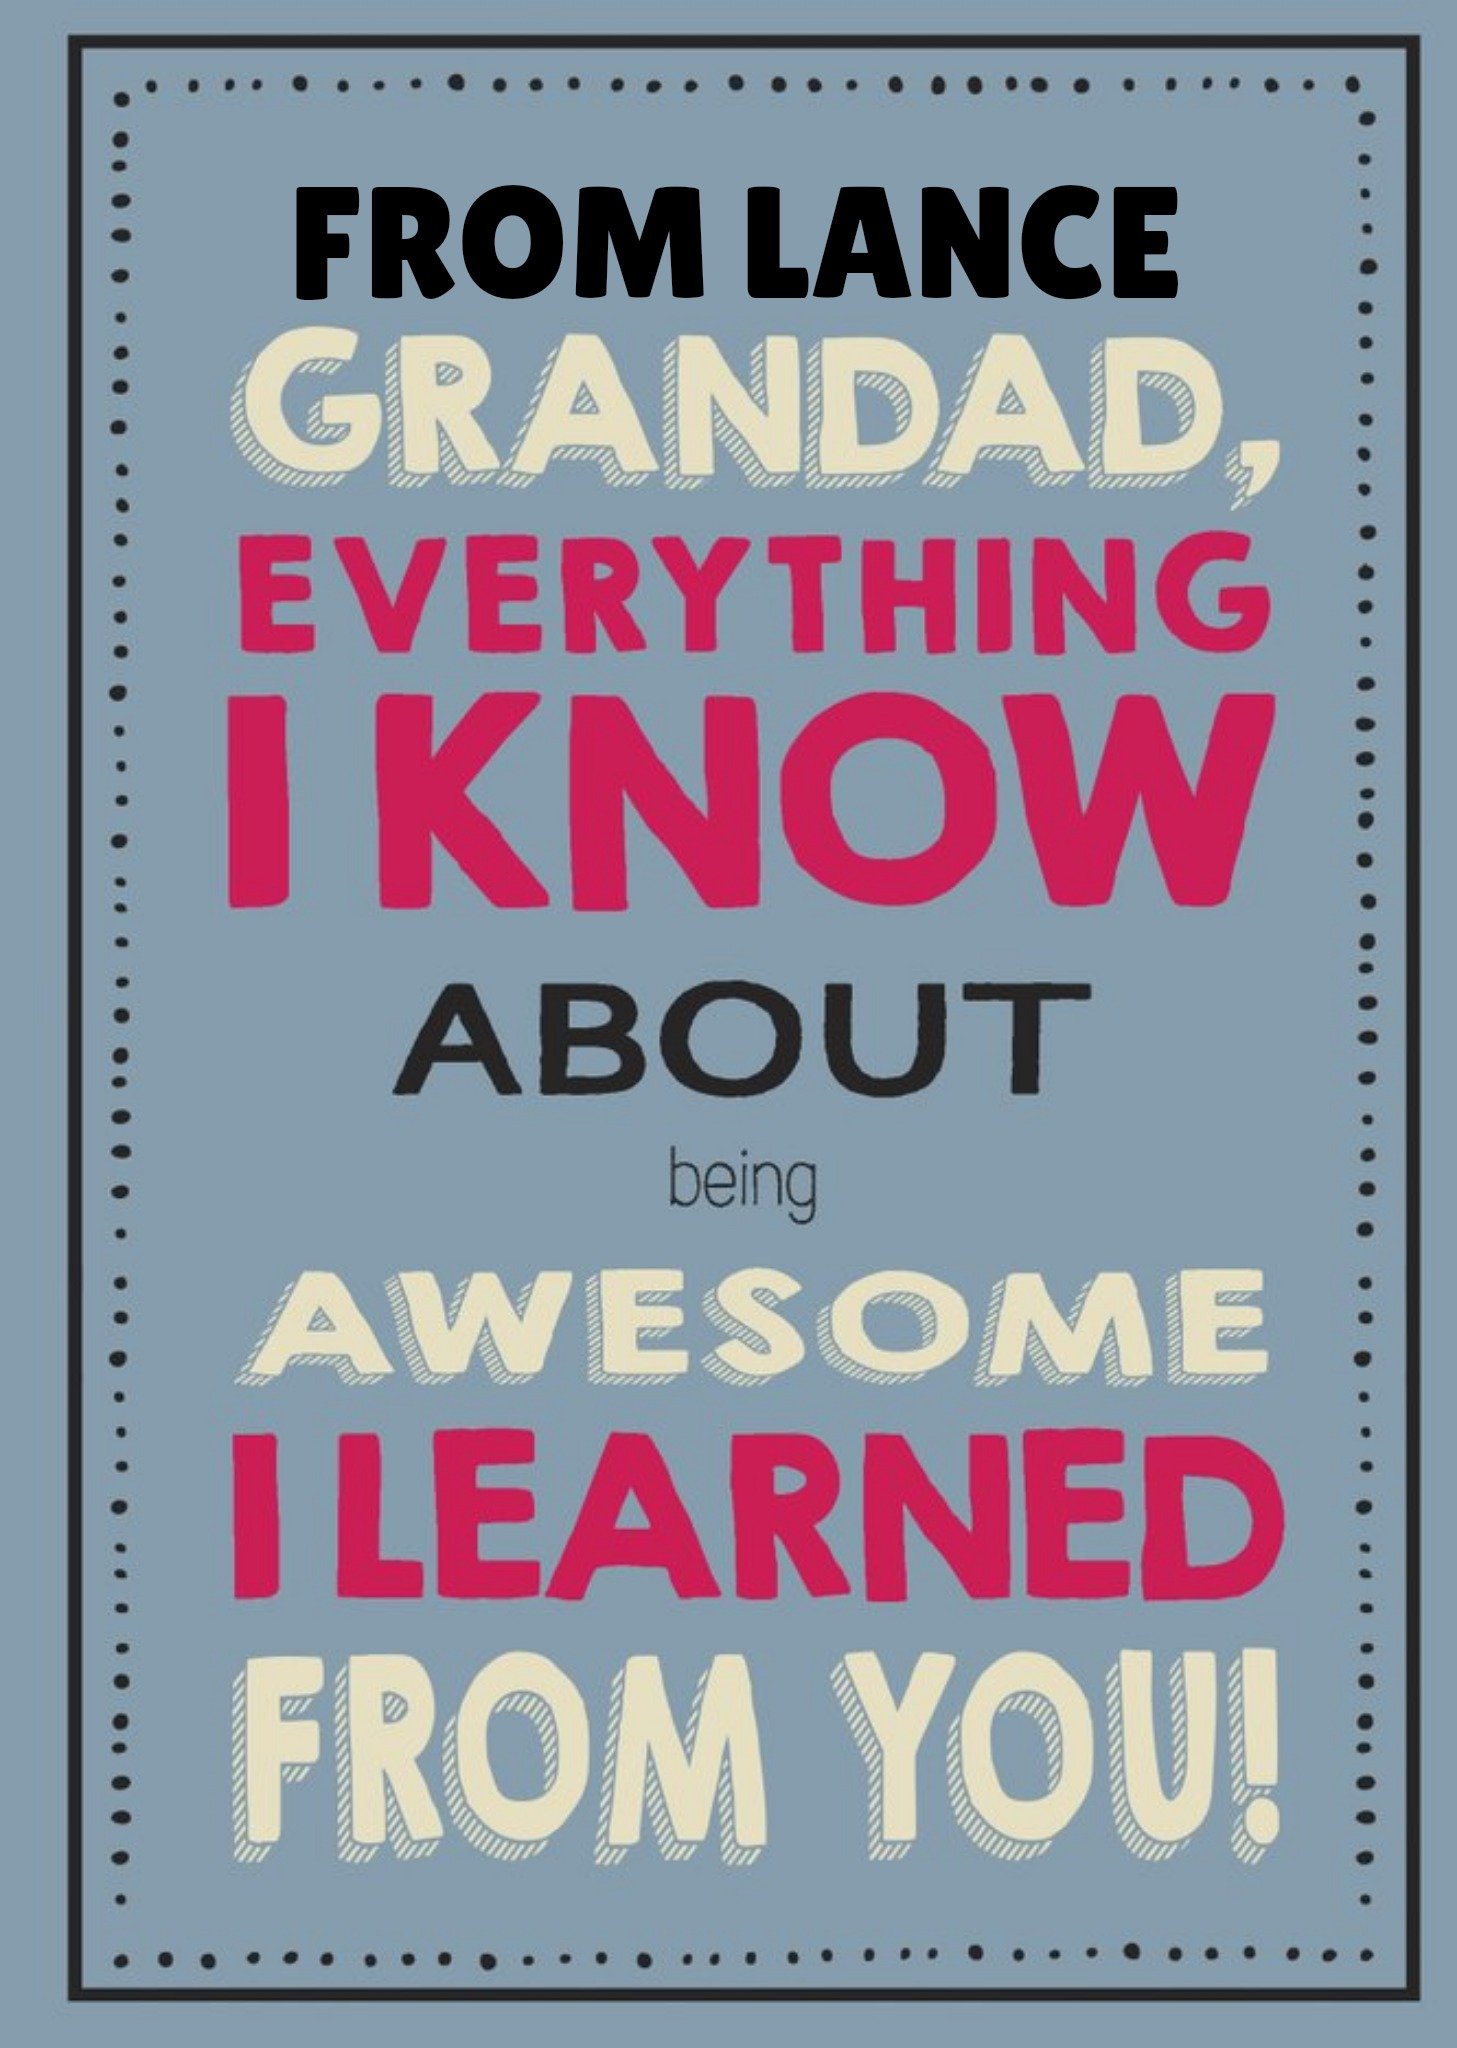 Moonpig Grandad Everything I Know About Being Awesome I Learmed From You Card, Large